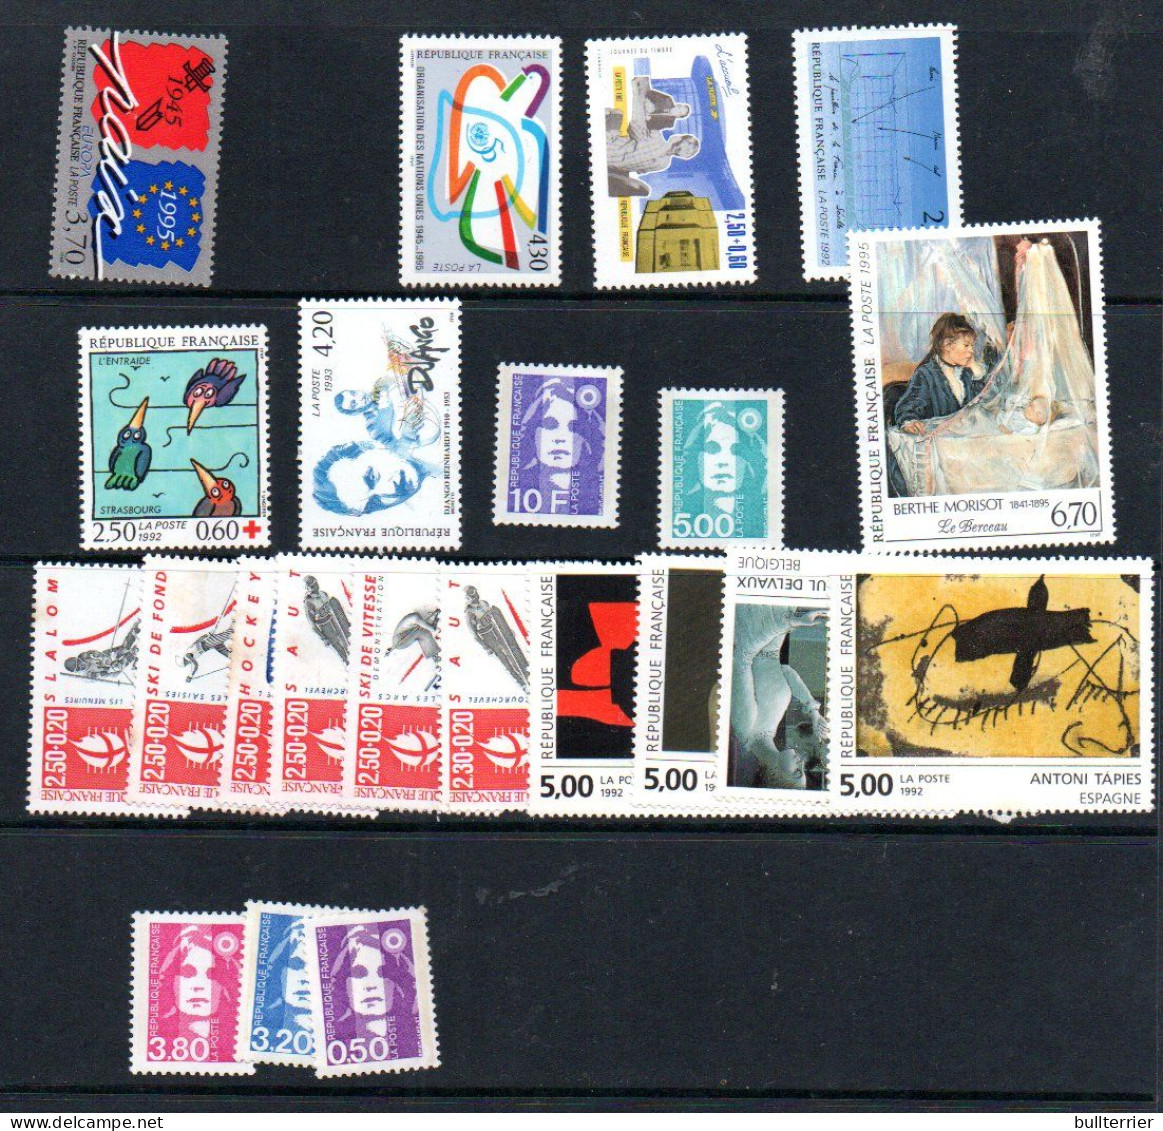 FRANCE - 1991/1995  - Various Issues Inc 5 Nd 10fr Defs   MNH Stamps  , SG CAT £61 - Unused Stamps